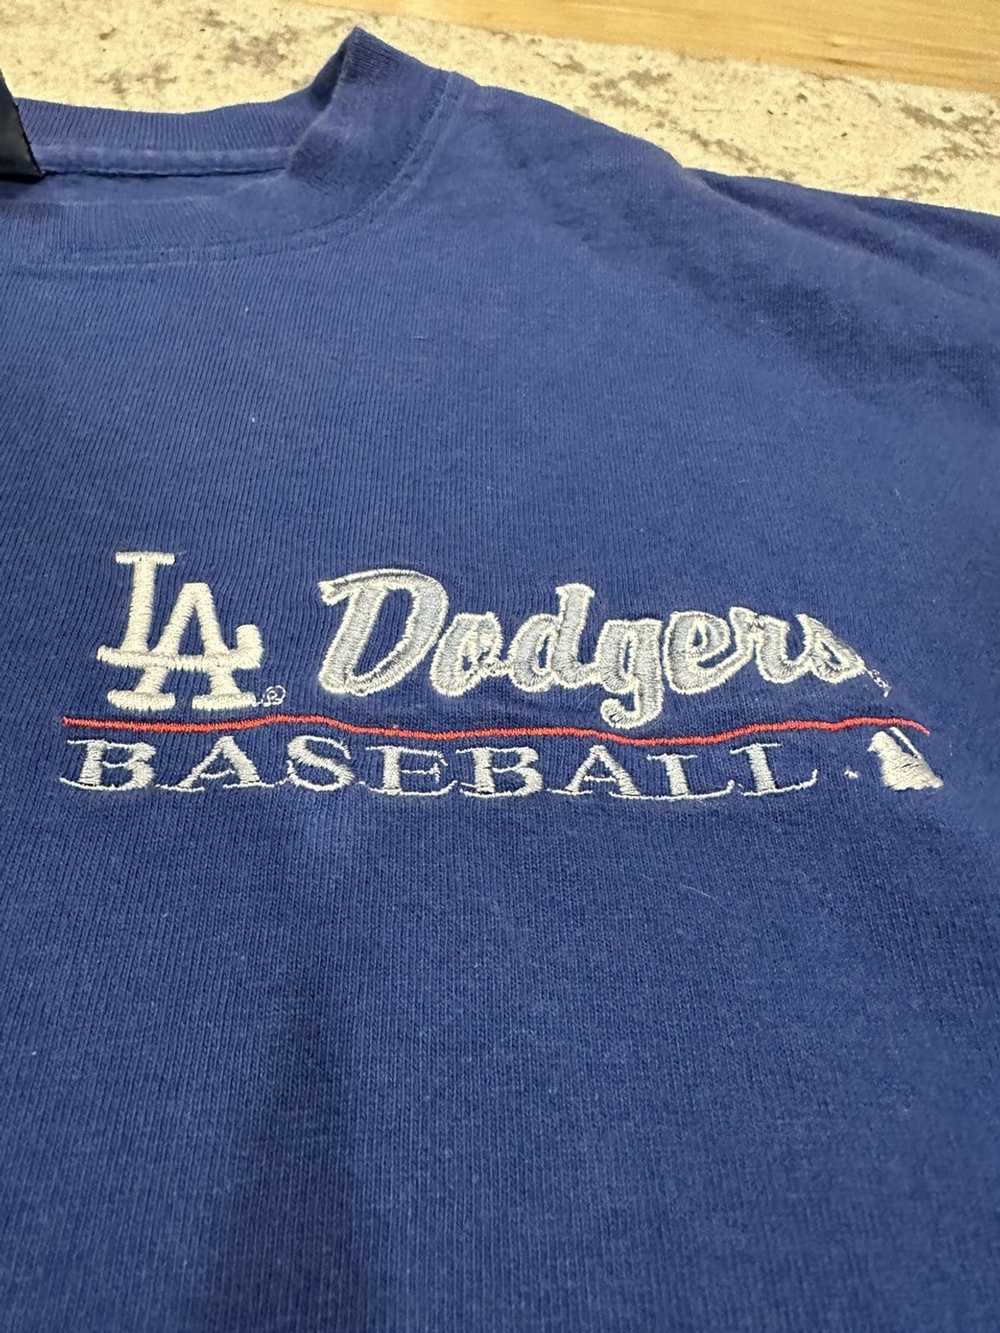 Los Angeles Dodgers on X: These jerseys. 🔥 Join us at Dodger